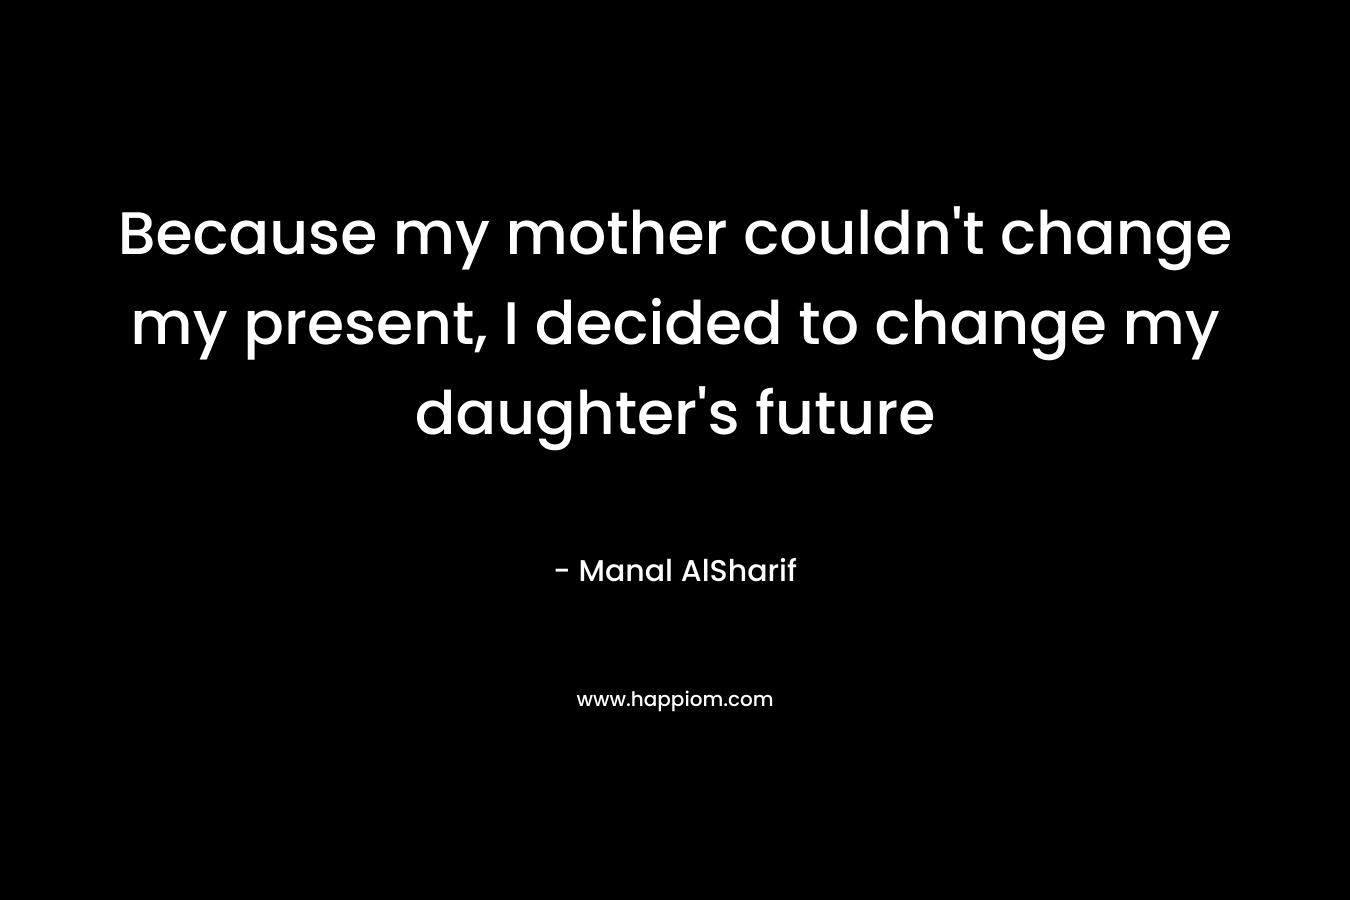 Because my mother couldn't change my present, I decided to change my daughter's future